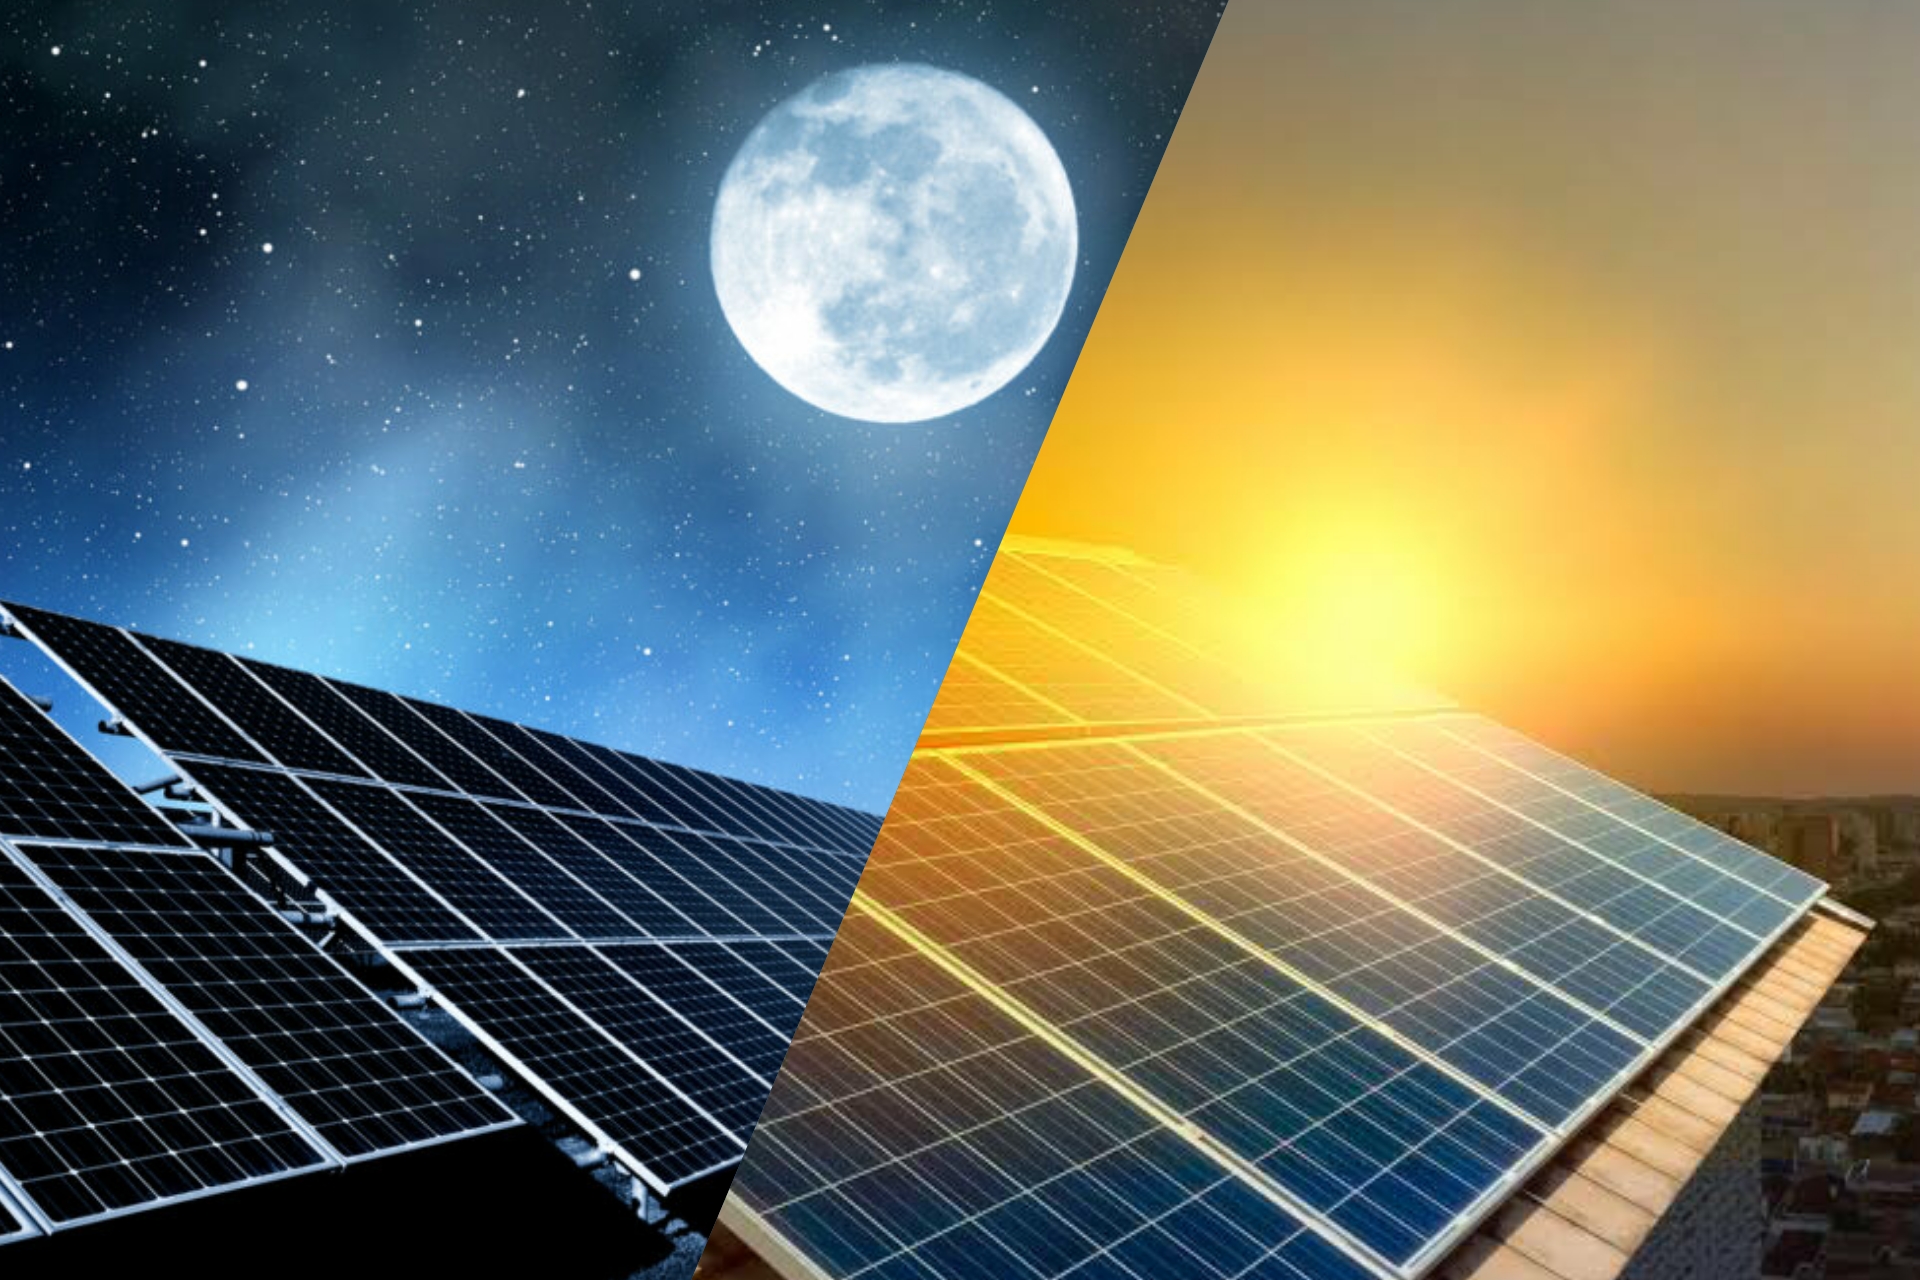 New Solar technology that can generate electricity at night All